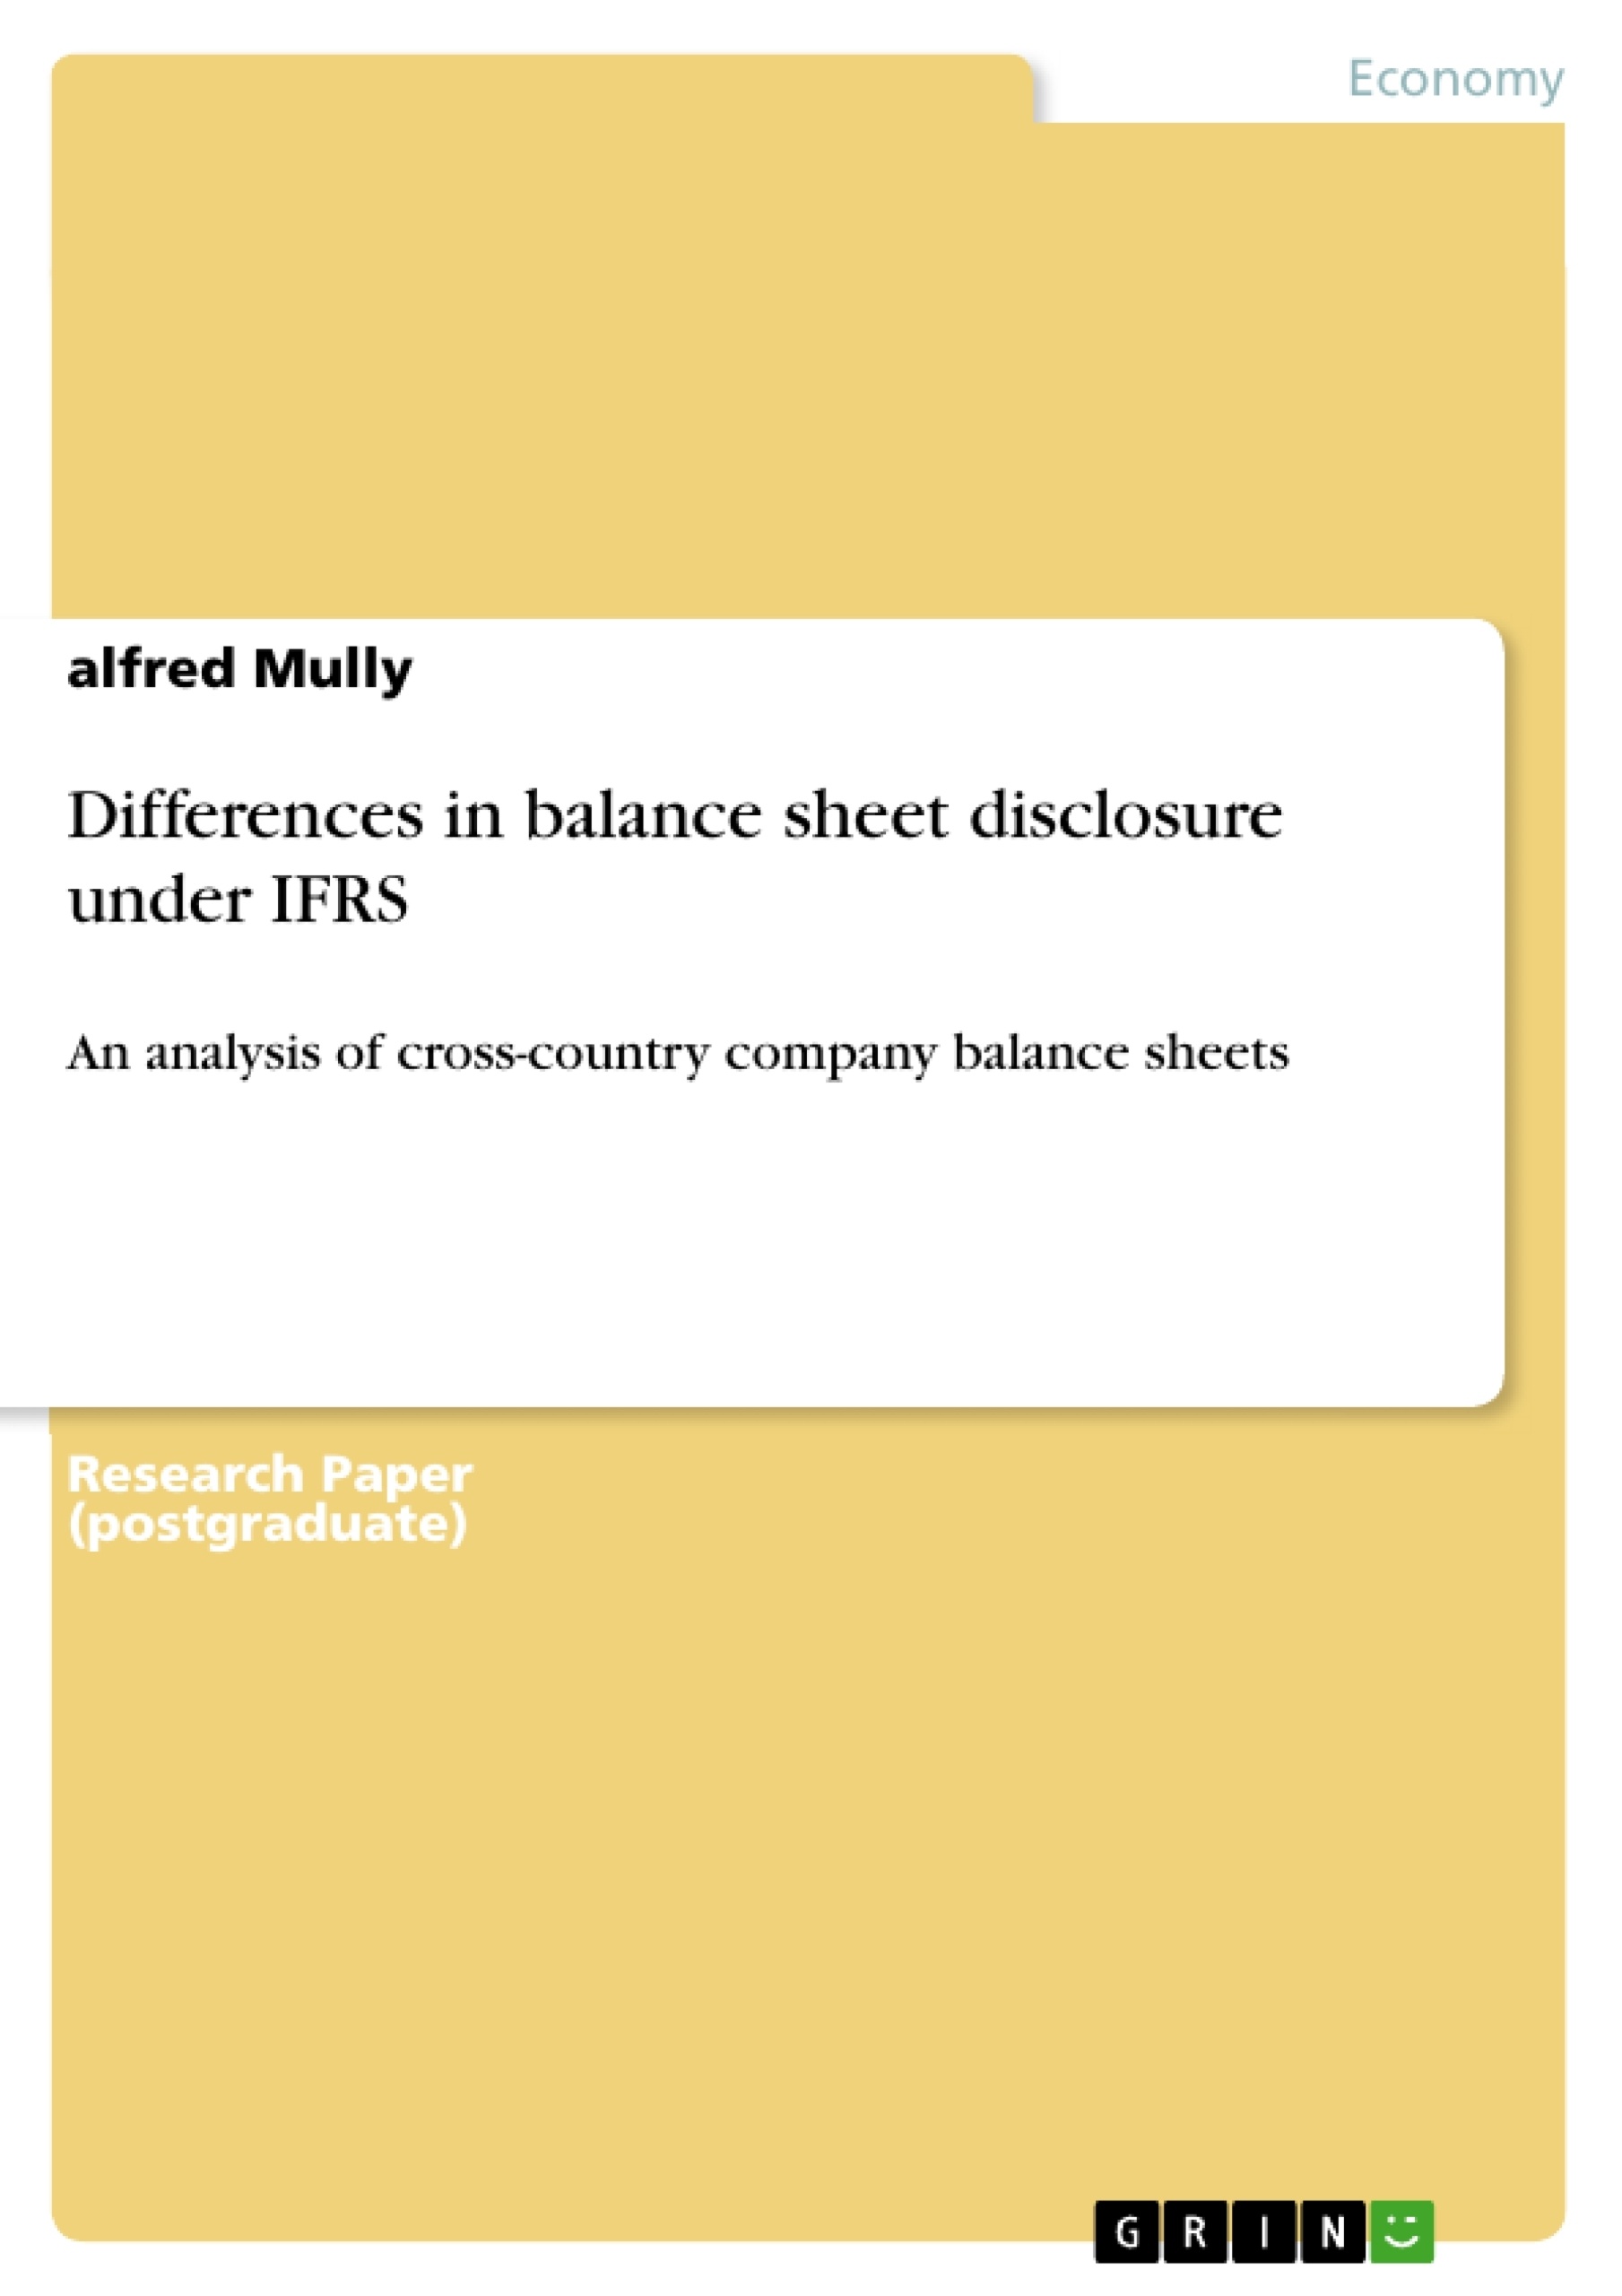 Title: Differences in balance sheet disclosure under IFRS